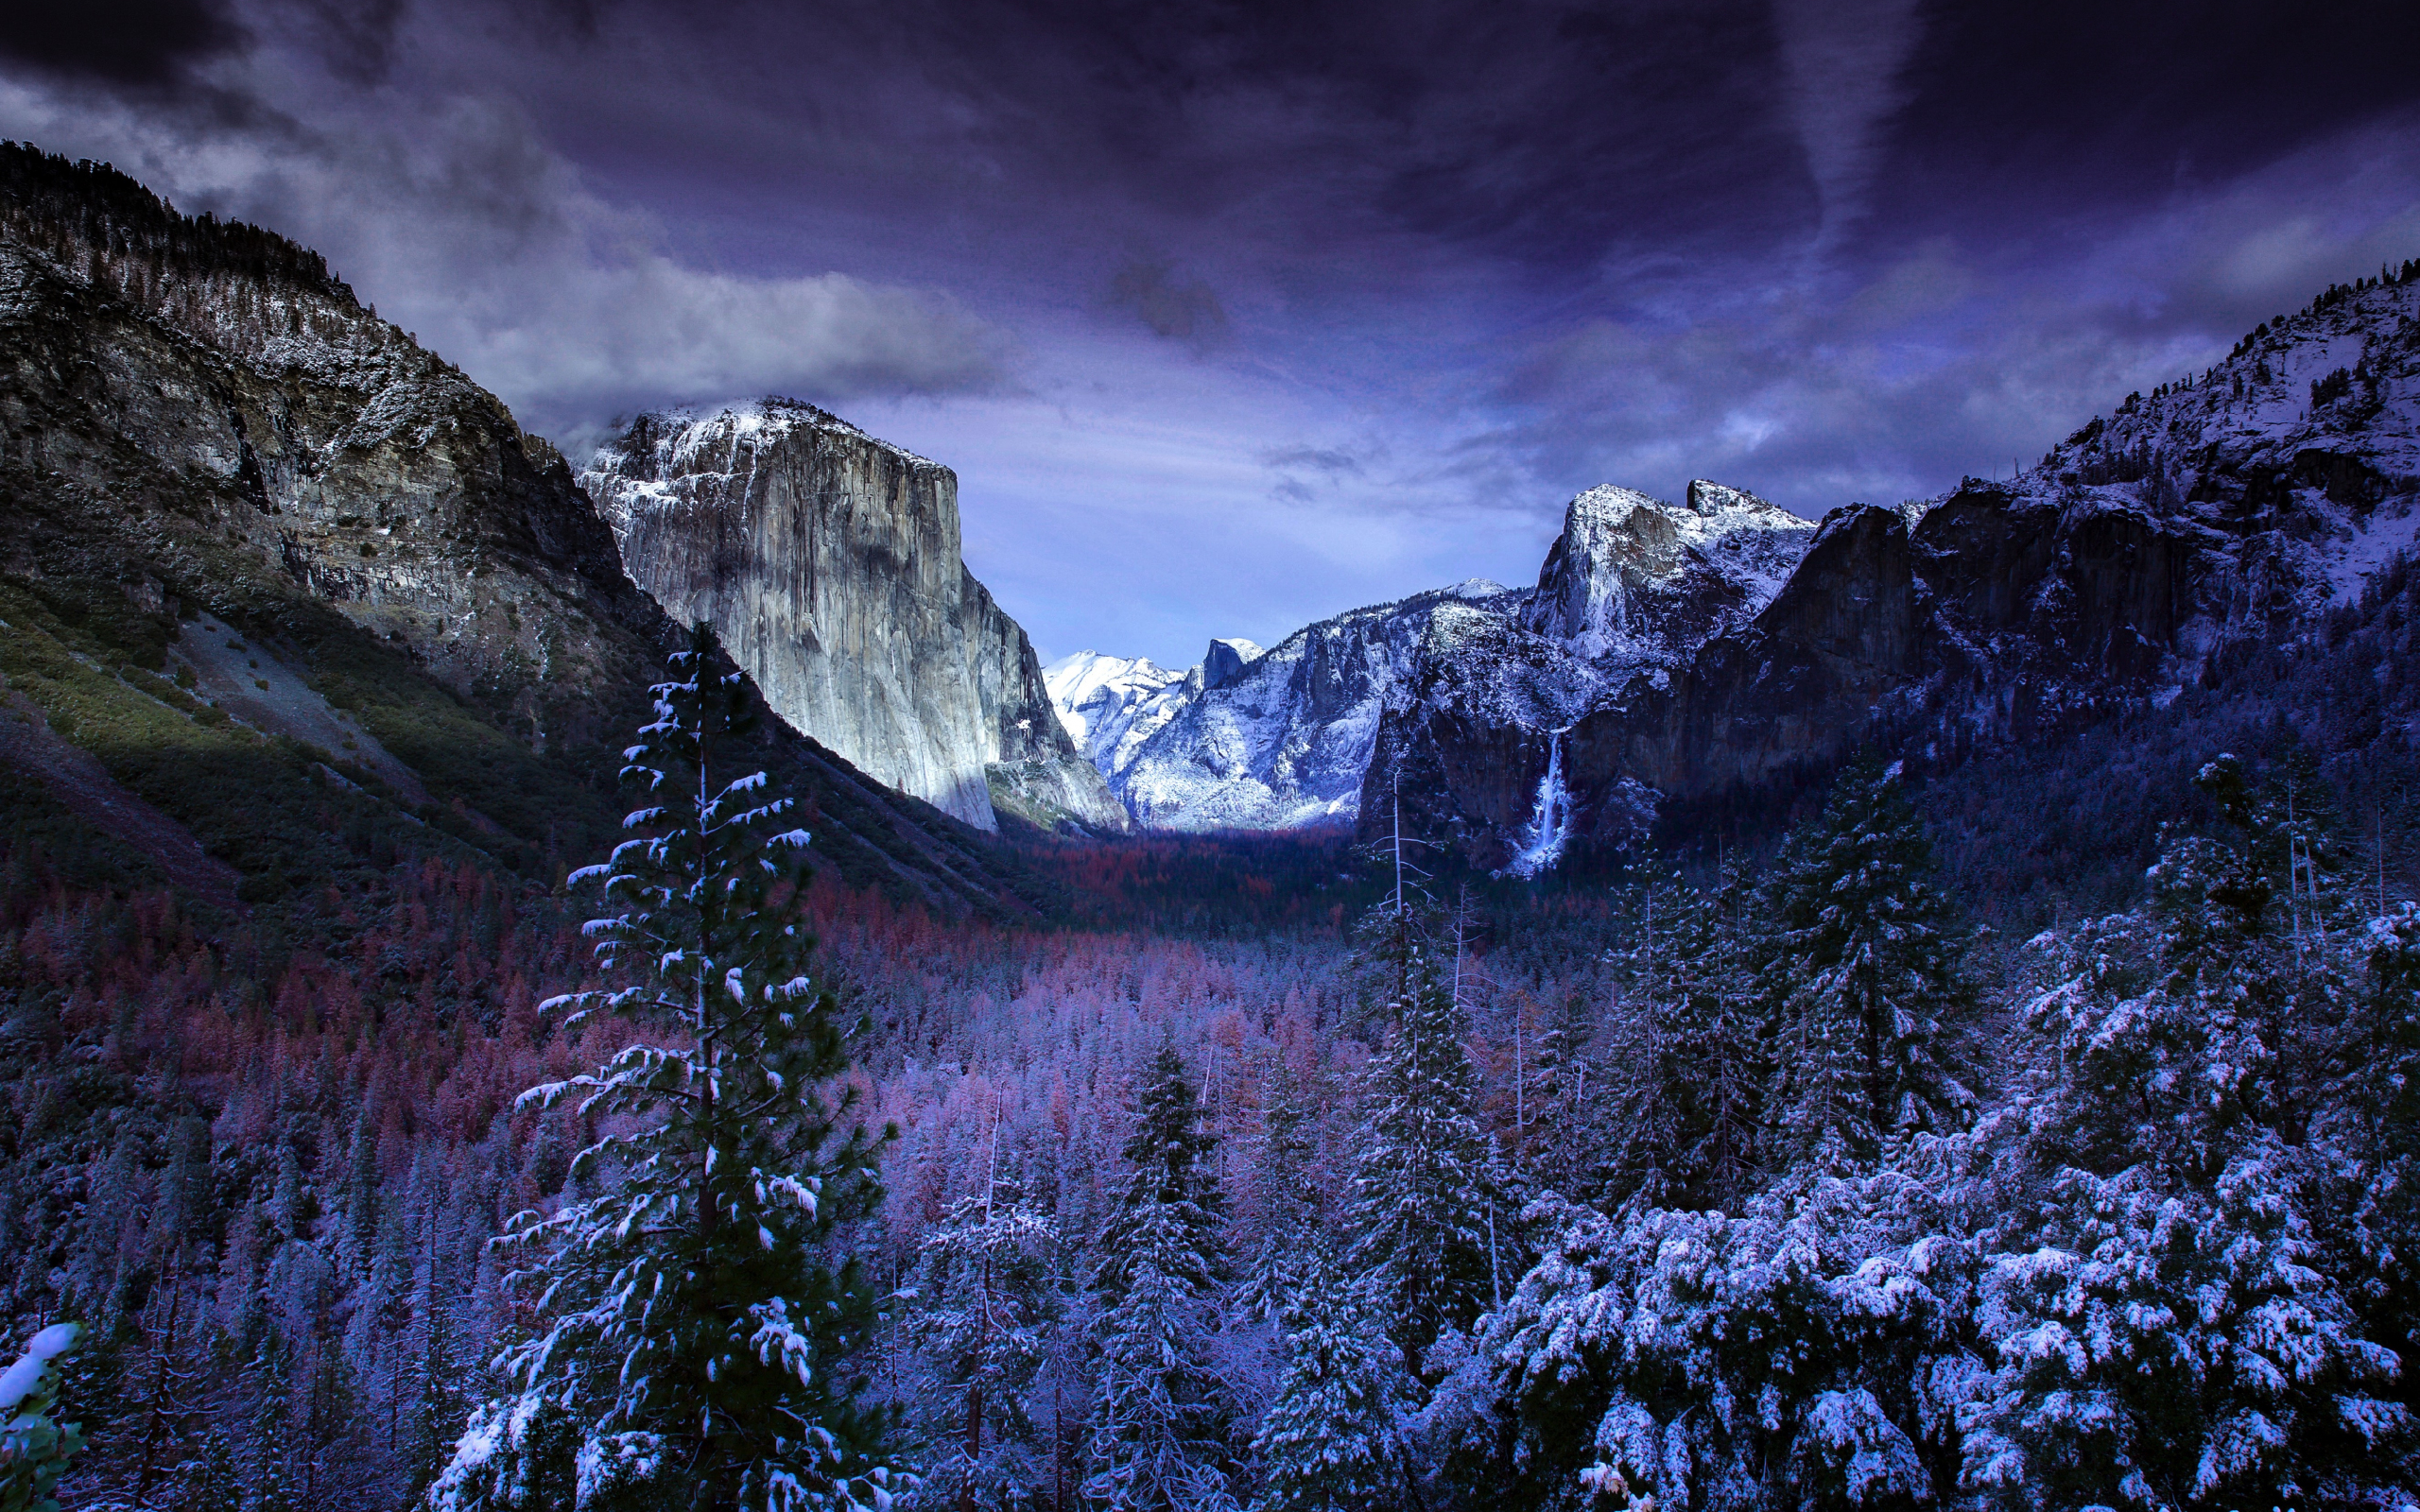 Download 2560x1600 Wallpaper Yosemite Valley Trees Sunset Winter Nature Dual Wide Widescreen 16 10 Widescreen 2560x1600 Hd Image Background 562